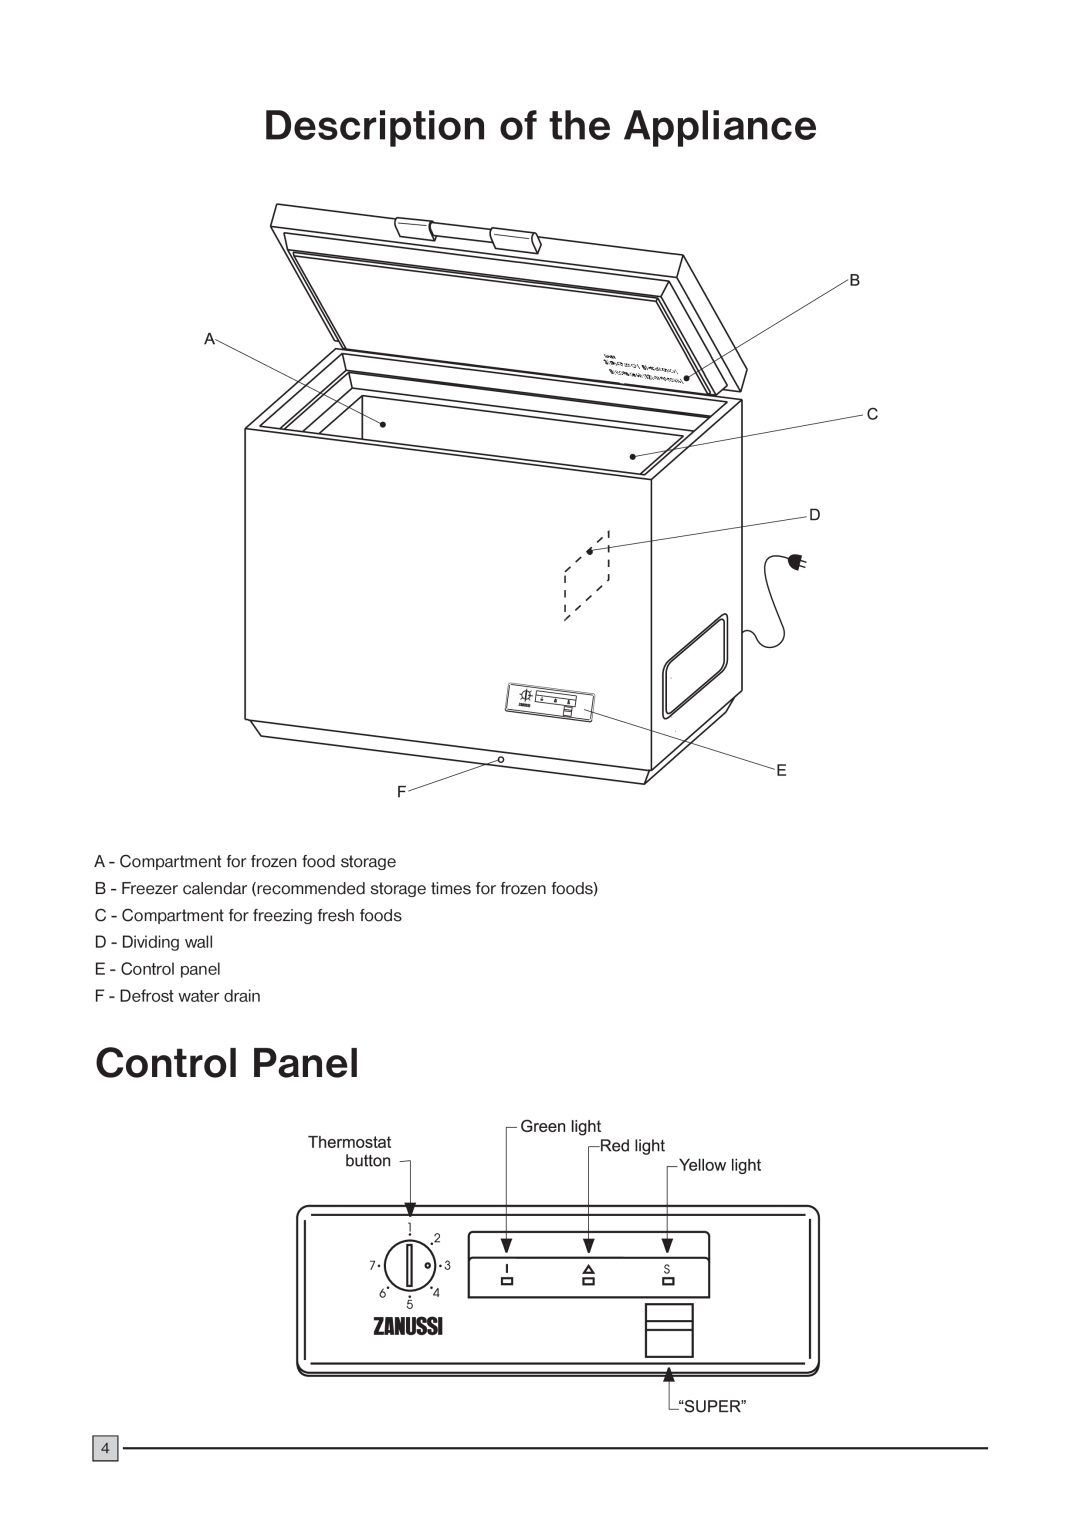 Zanussi ZCF 57 installation manual Description of the Appliance, Control Panel, A - Compartment for frozen food storage 